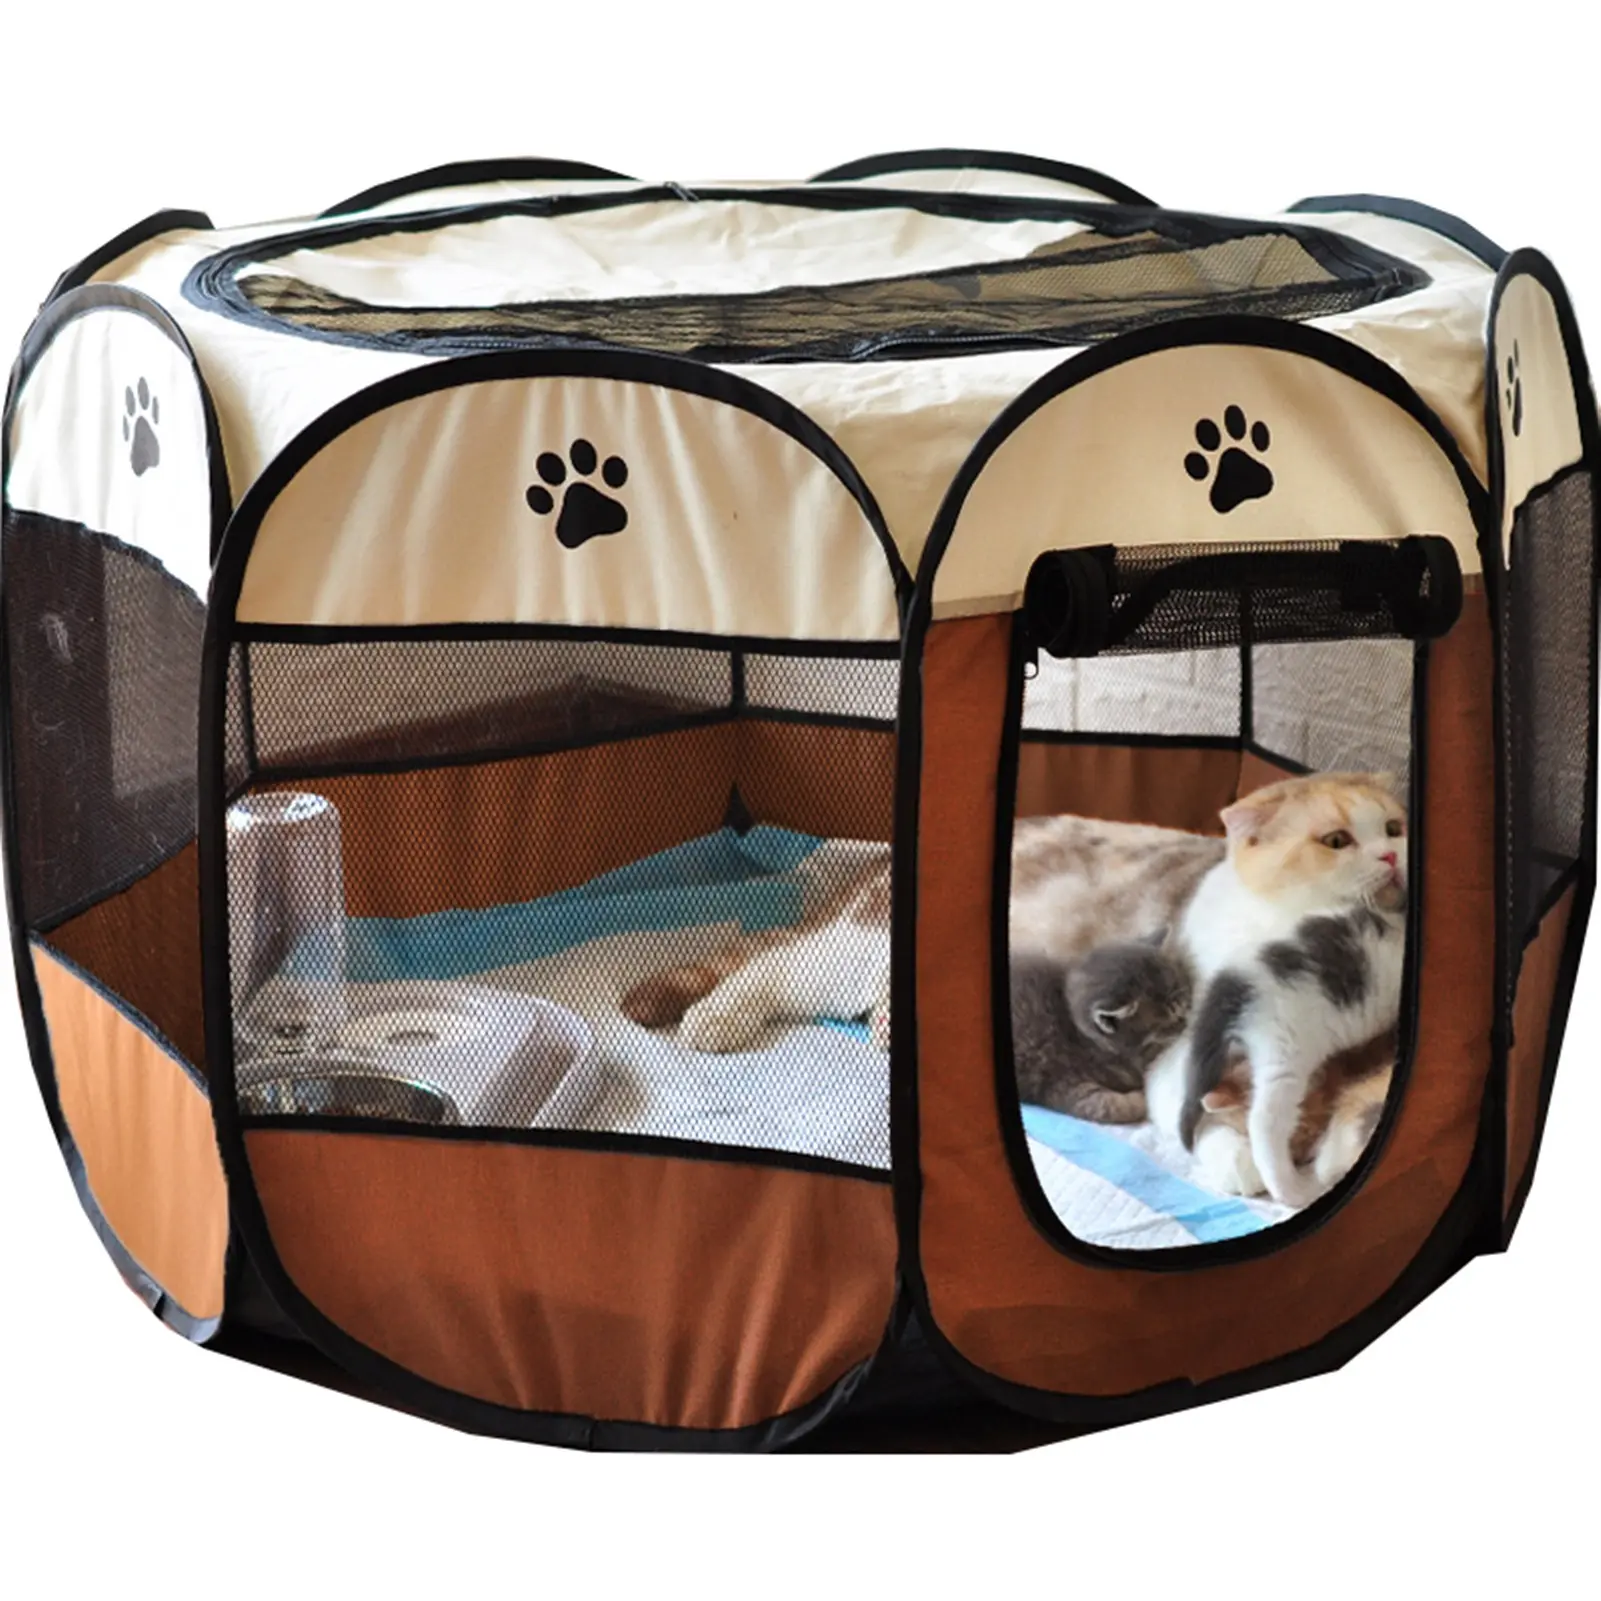 Portable House Pet Playpen Pet Cage Carriers Kennels Dog Home Foldable Dog Cages